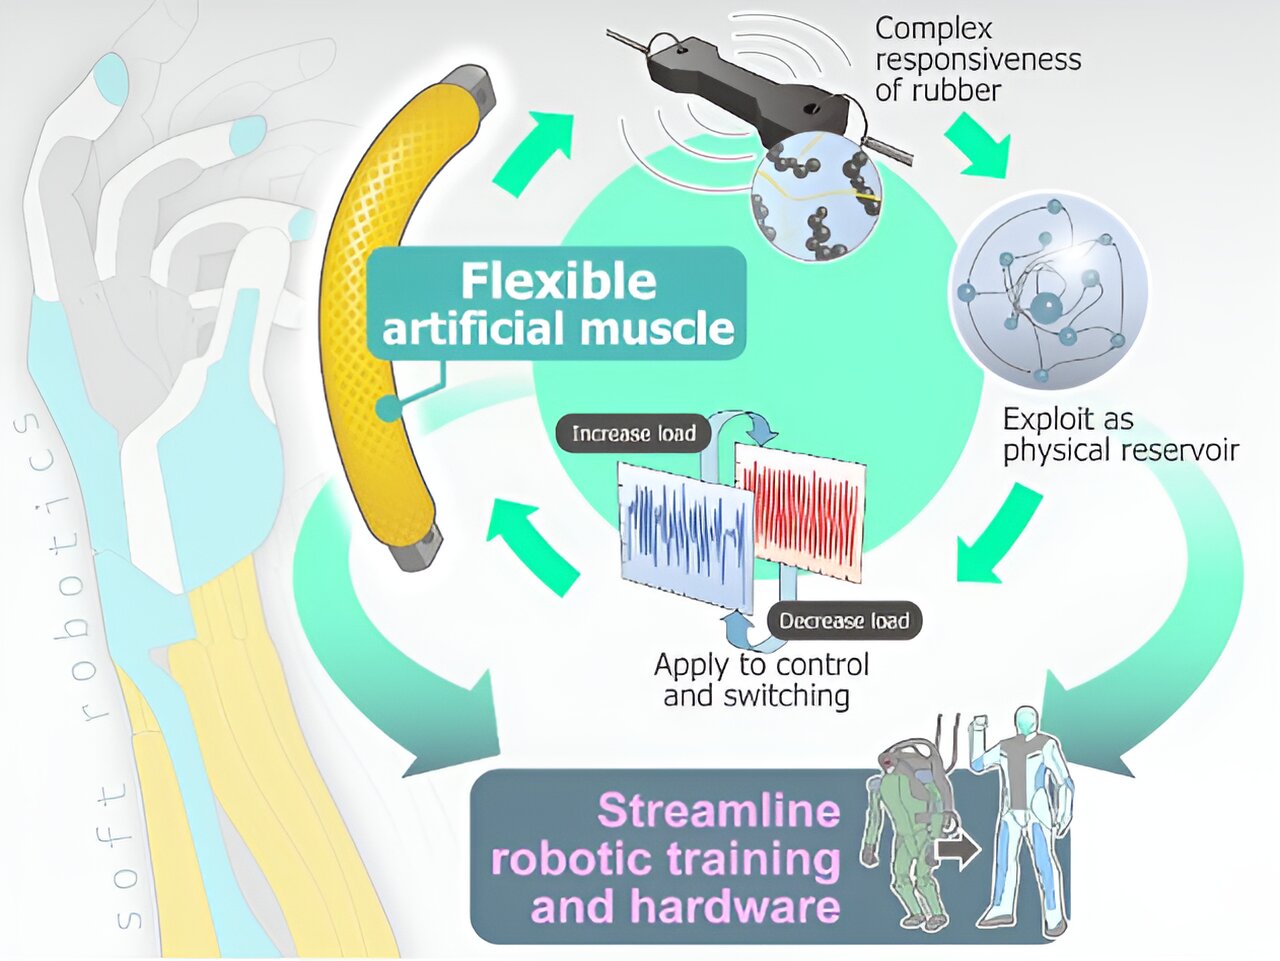 Researchers develop method to control pneumatic artificial muscles